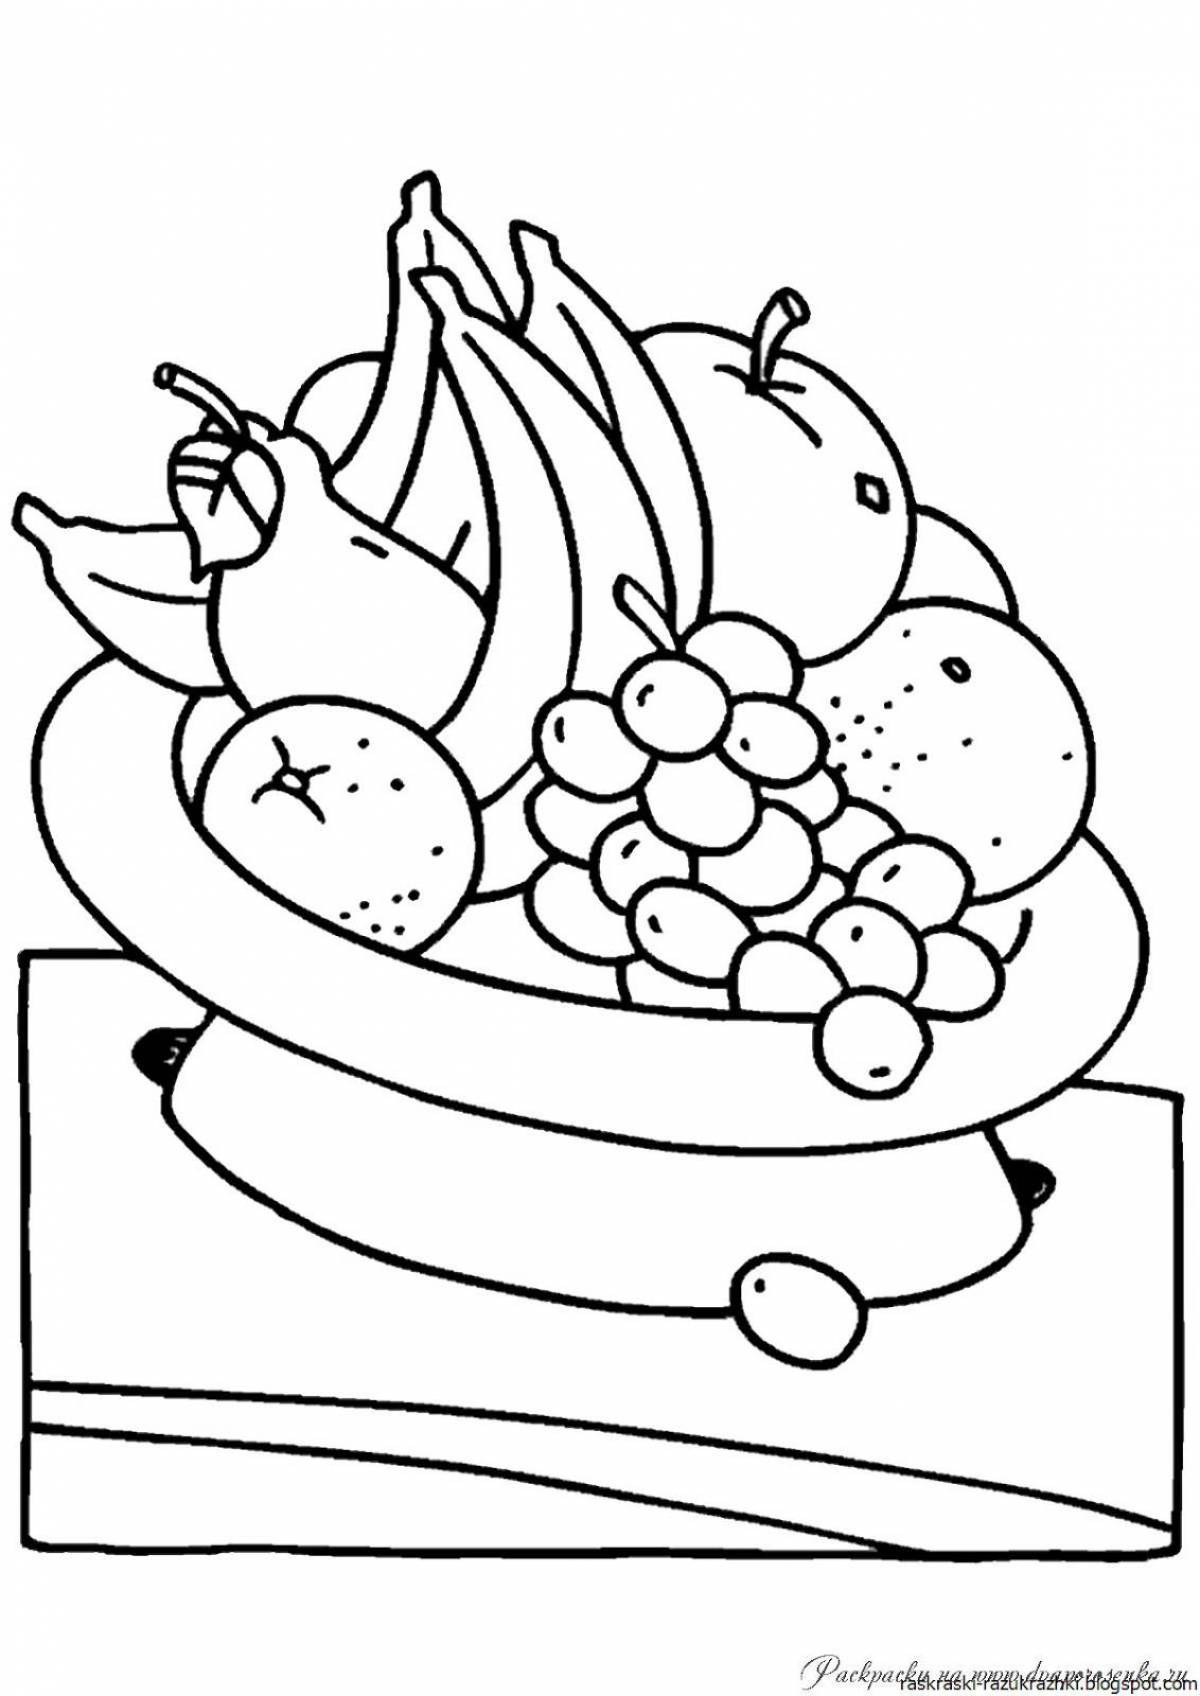 Fancy still life coloring for kids